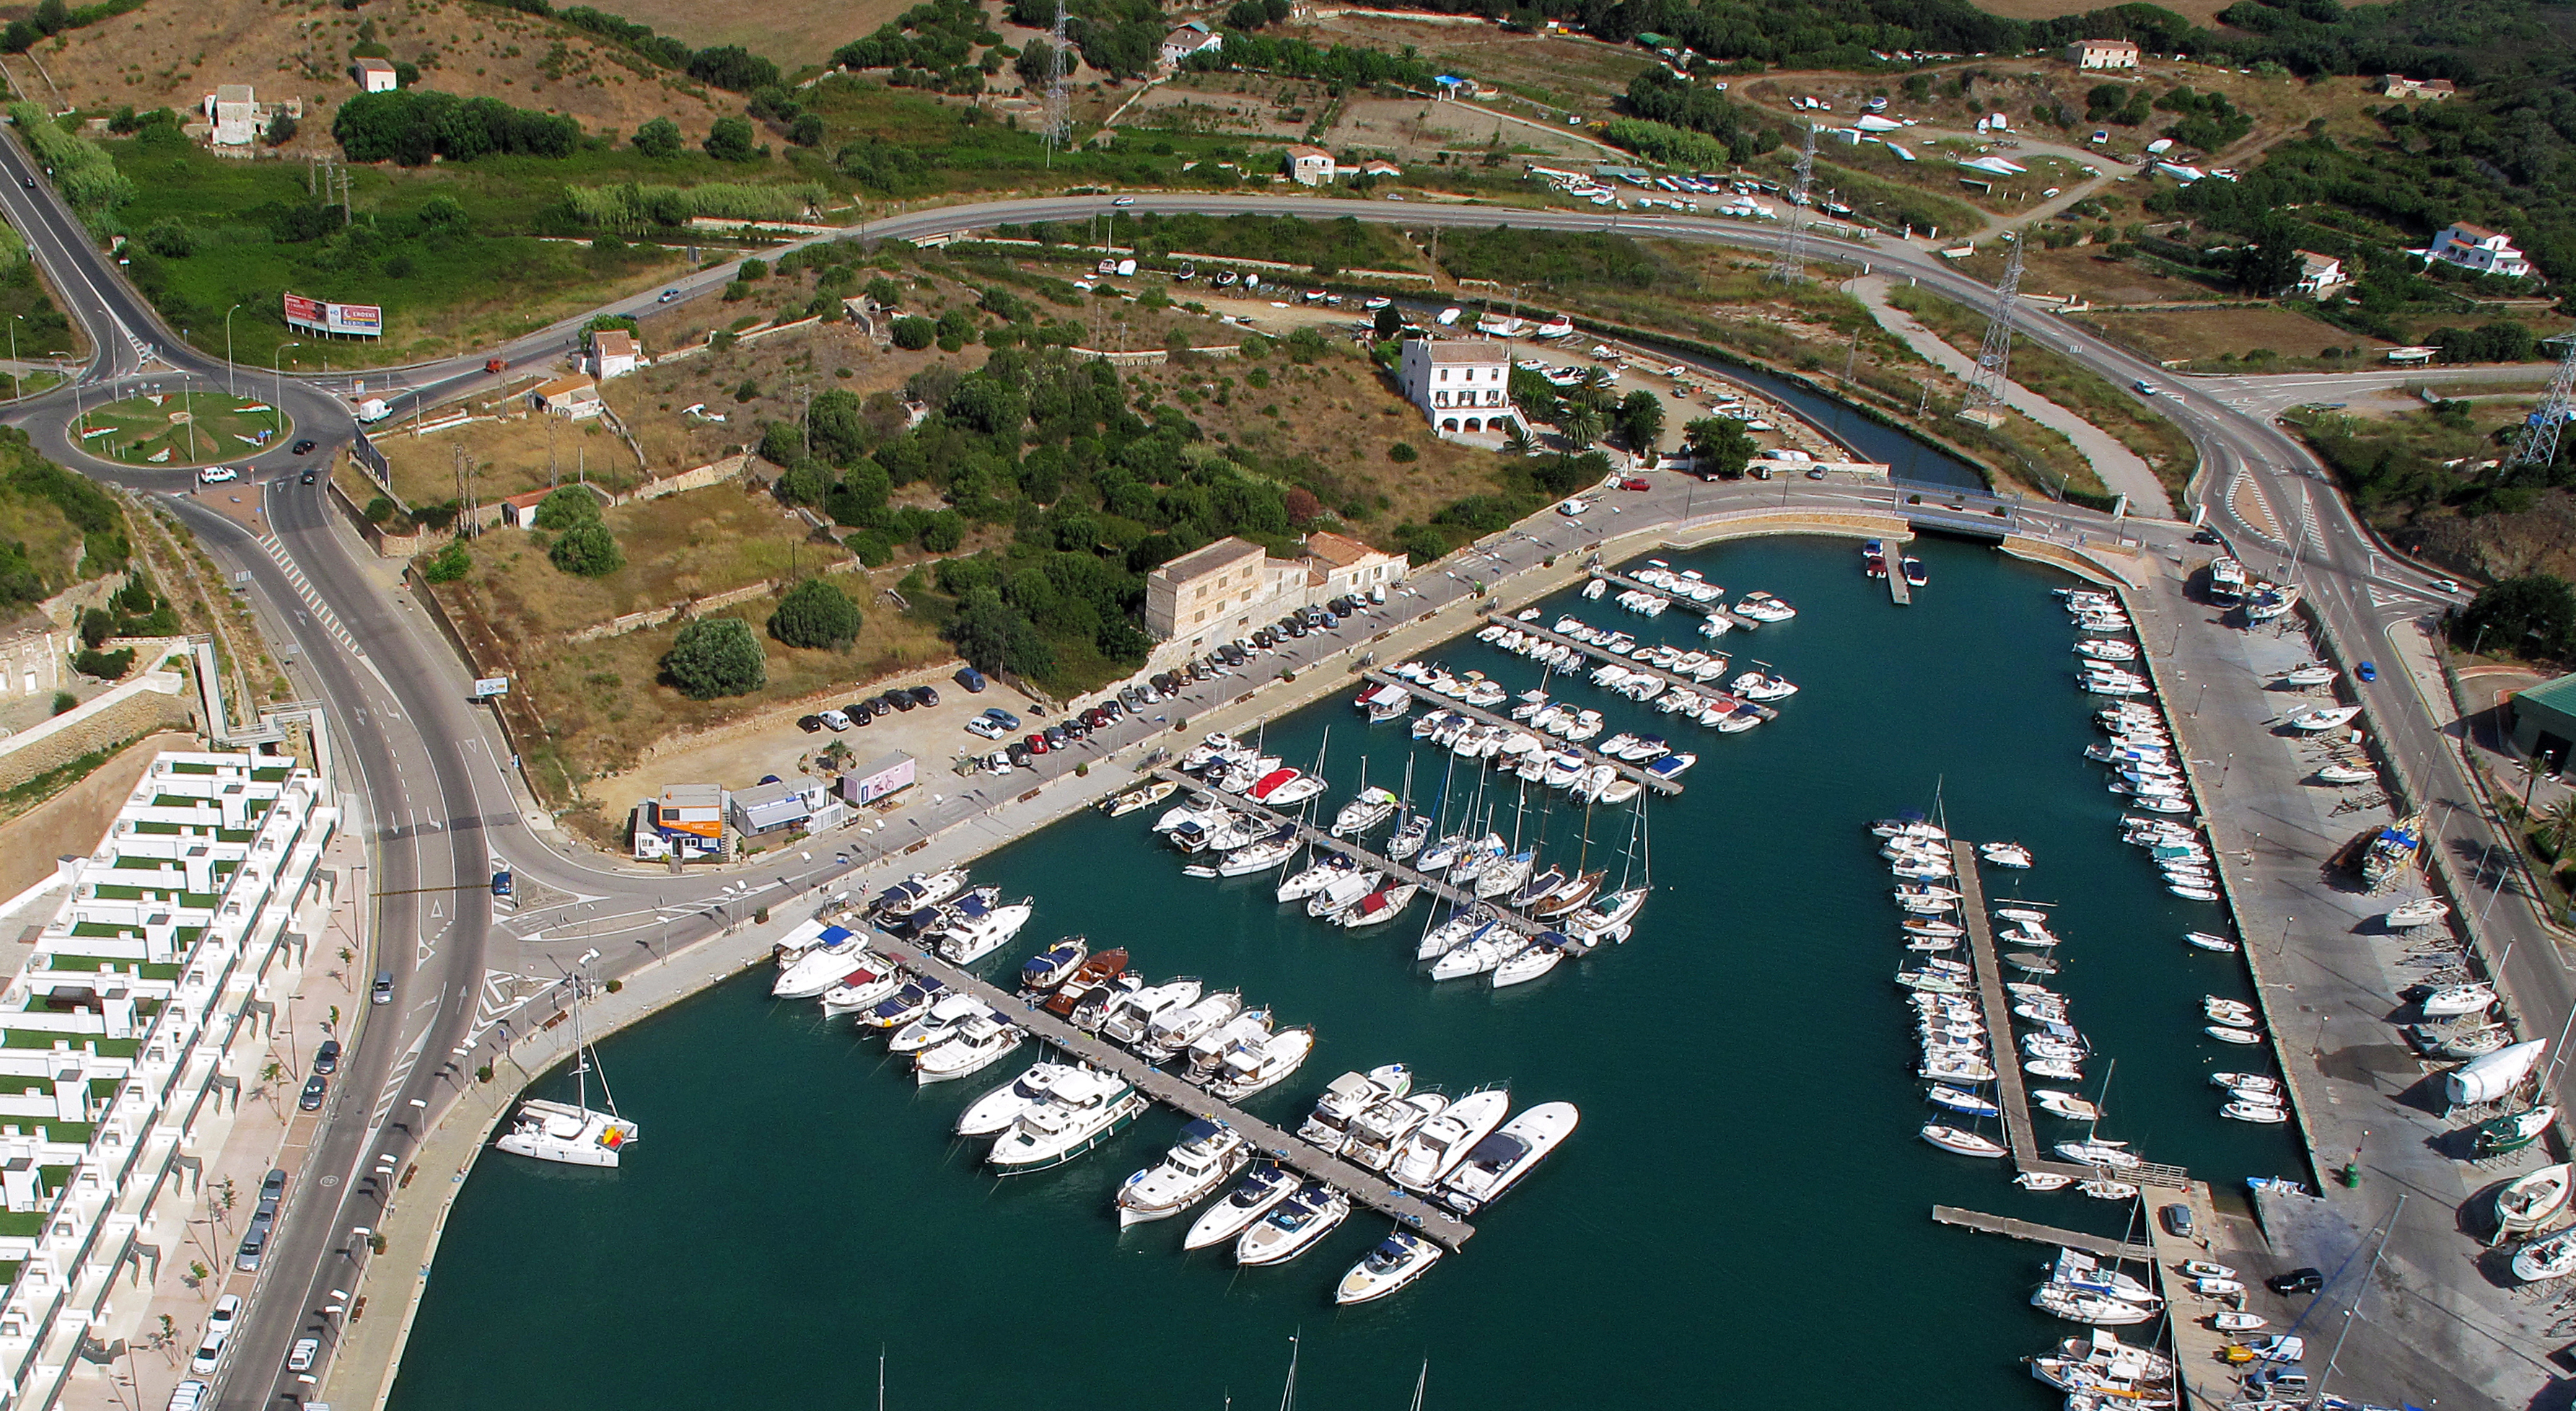 PAB plans to improve access to Palma and Maó Ports